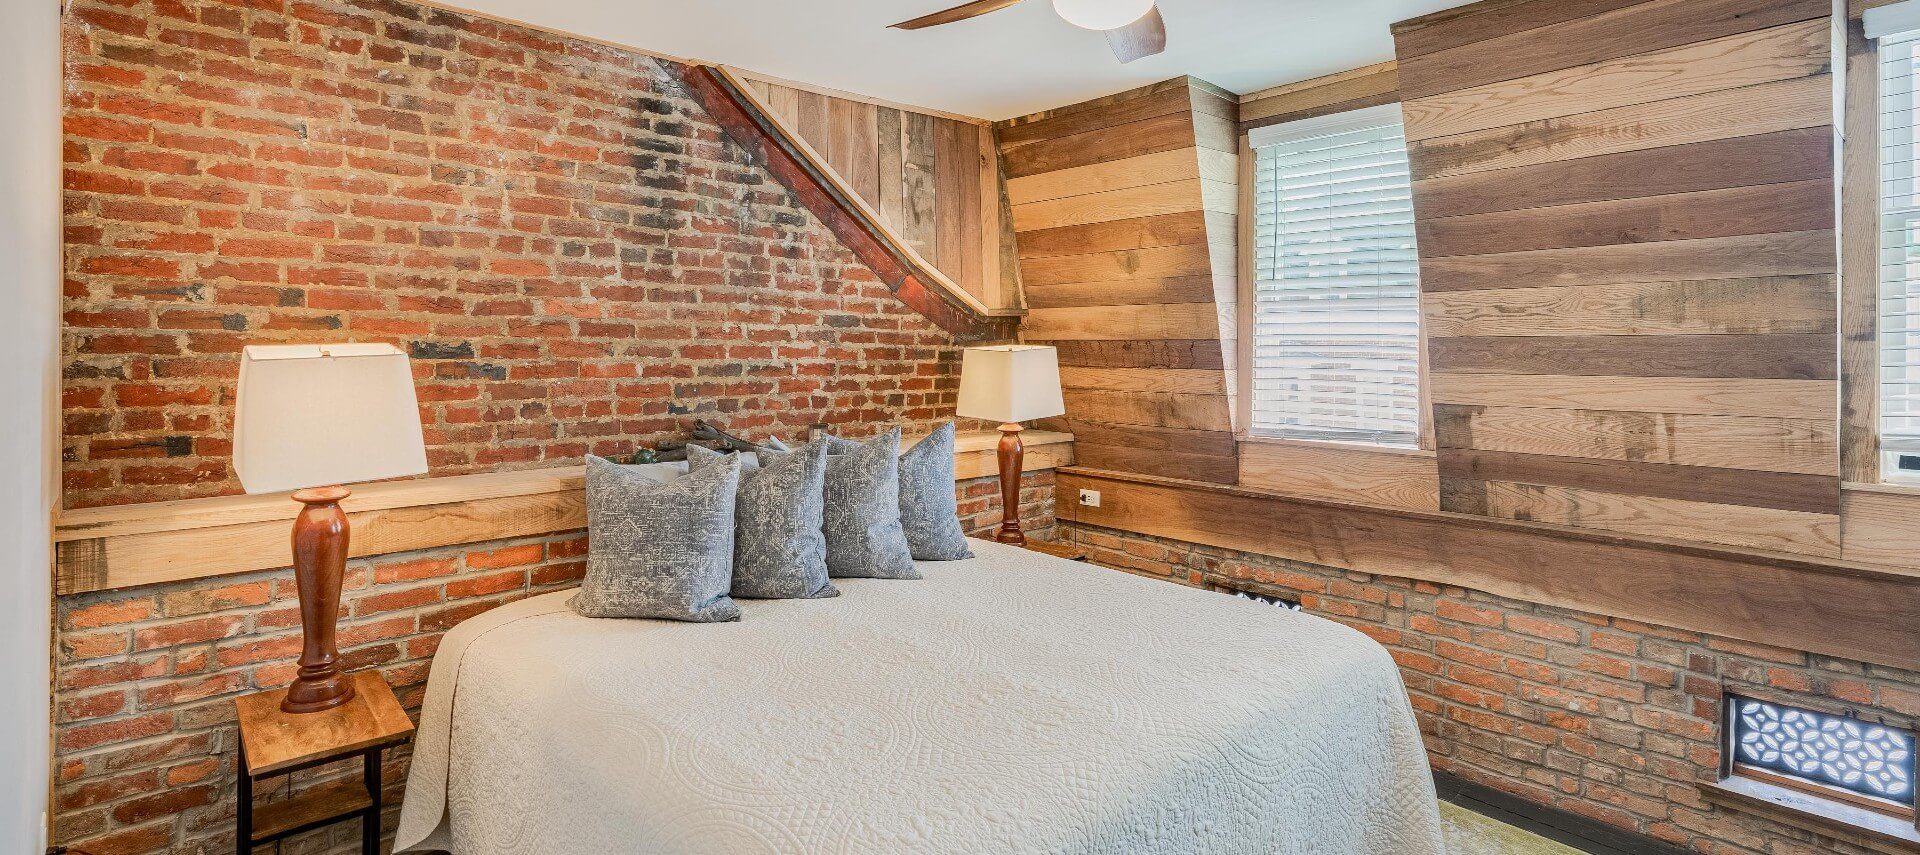 Unique bedroom with king bed, brick and wood panel details on the walls and two bright windows